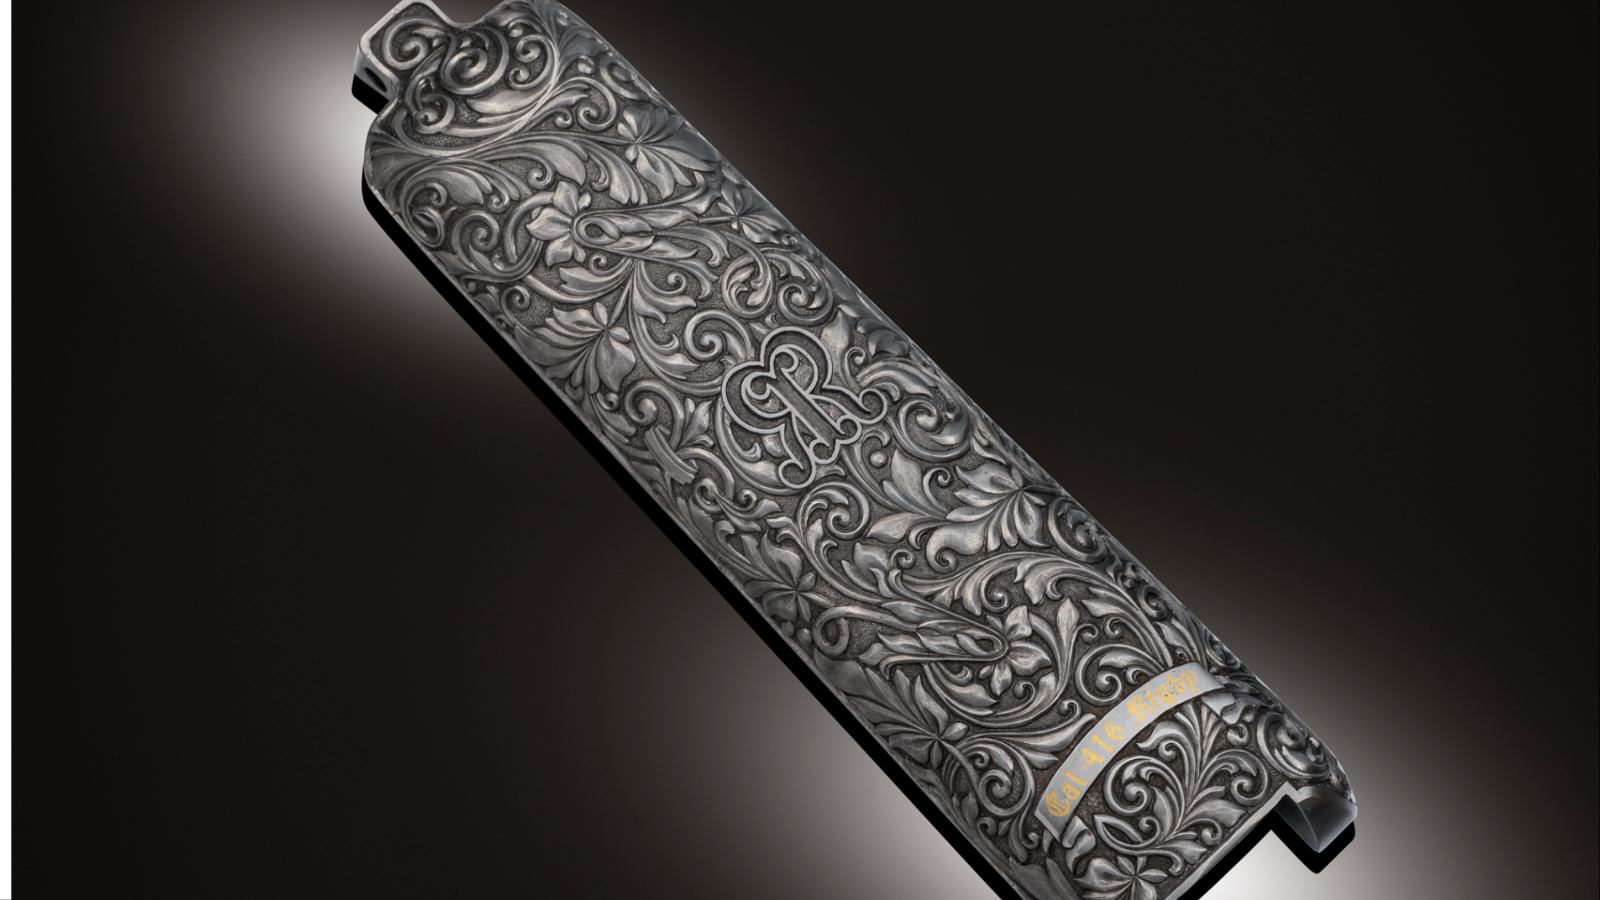 The steel scroll rifle cover was honoured for 'exceptional and outstanding craftsmanship'.